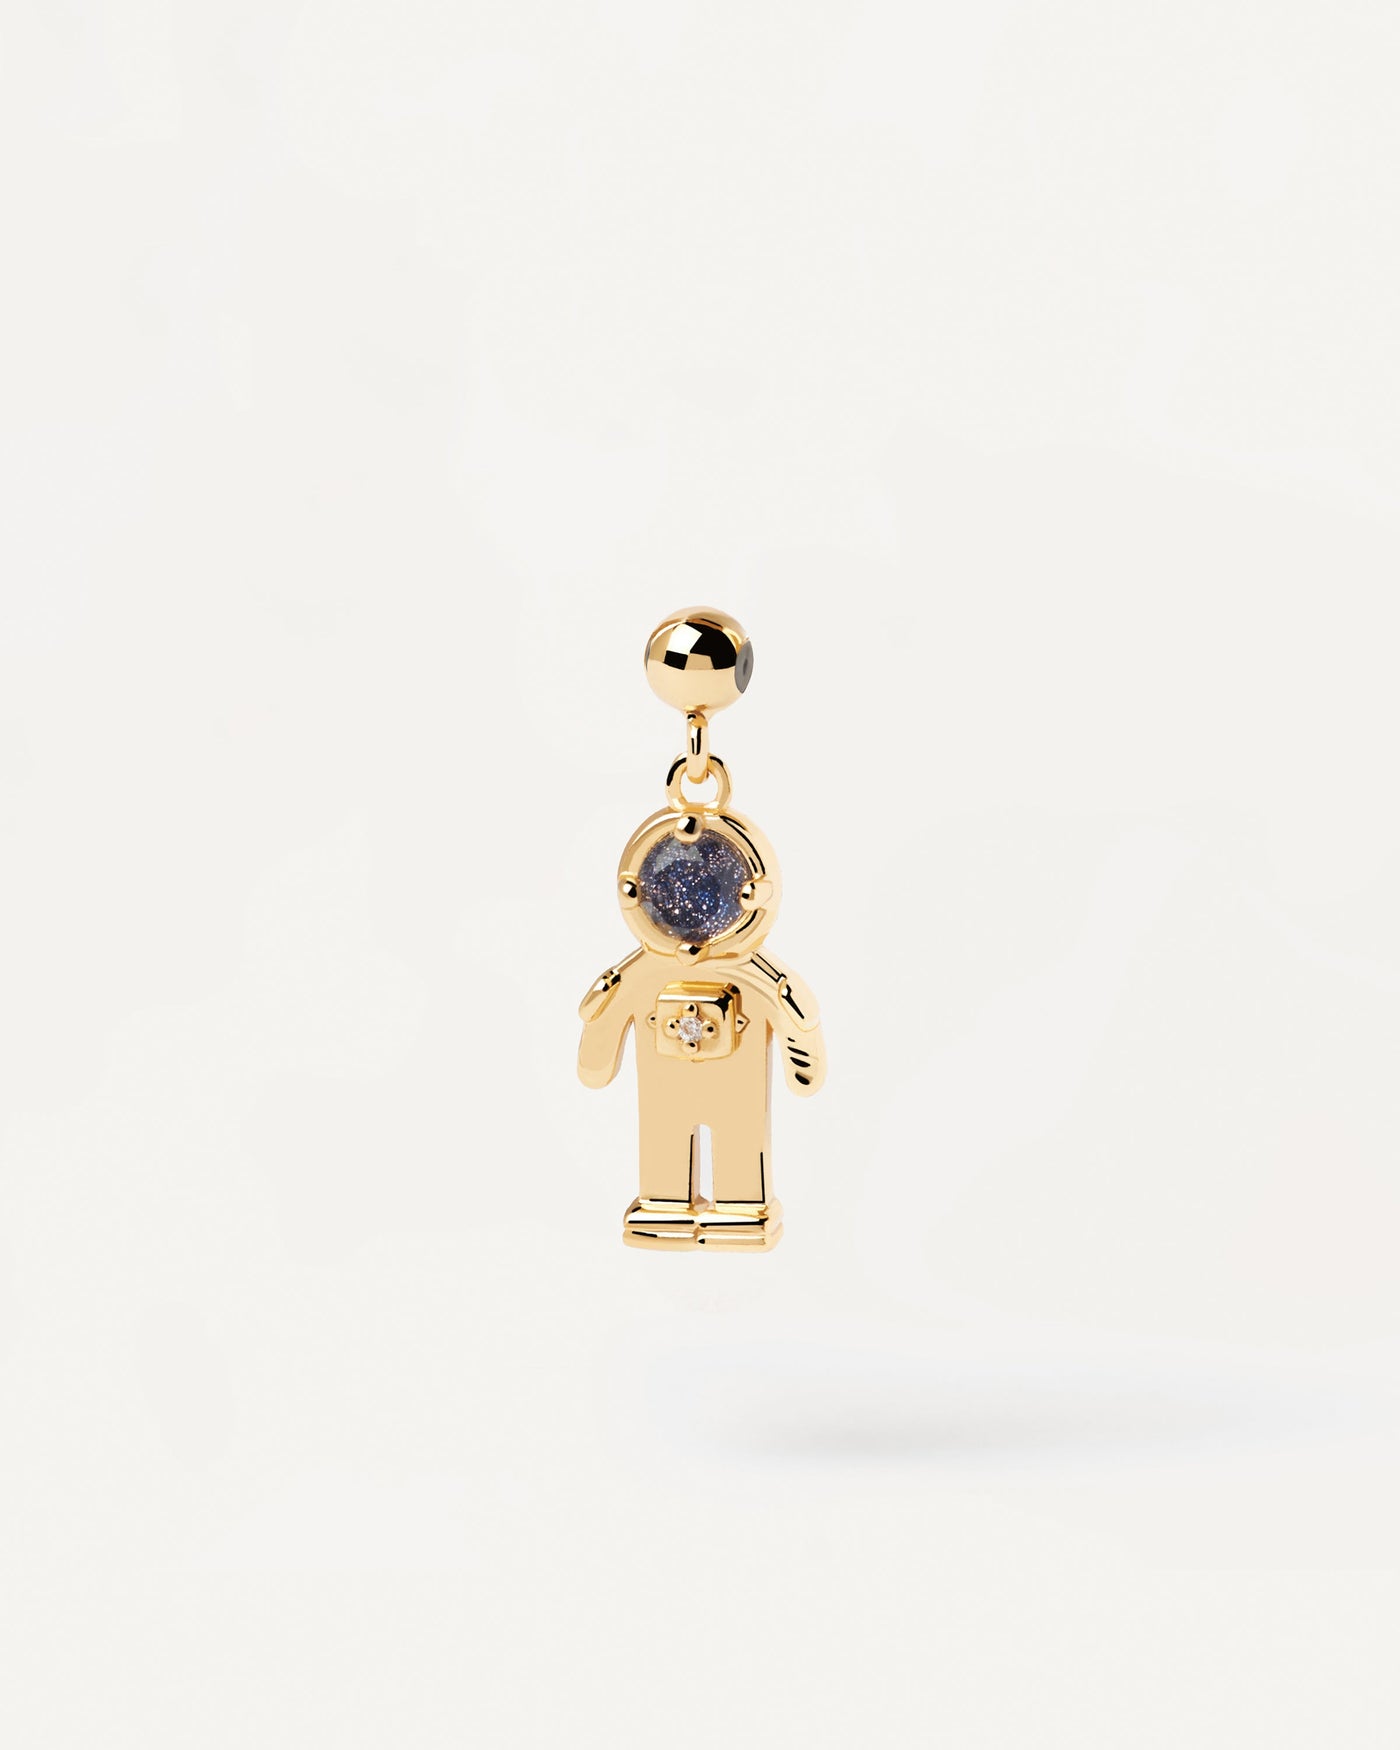 2023 Selection | Astronaut Charm. Gold-plated silver cosmonaut pendant for Charm necklace or bracelet with blue gemstone. Get the latest arrival from PDPAOLA. Place your order safely and get this Best Seller. Free Shipping.